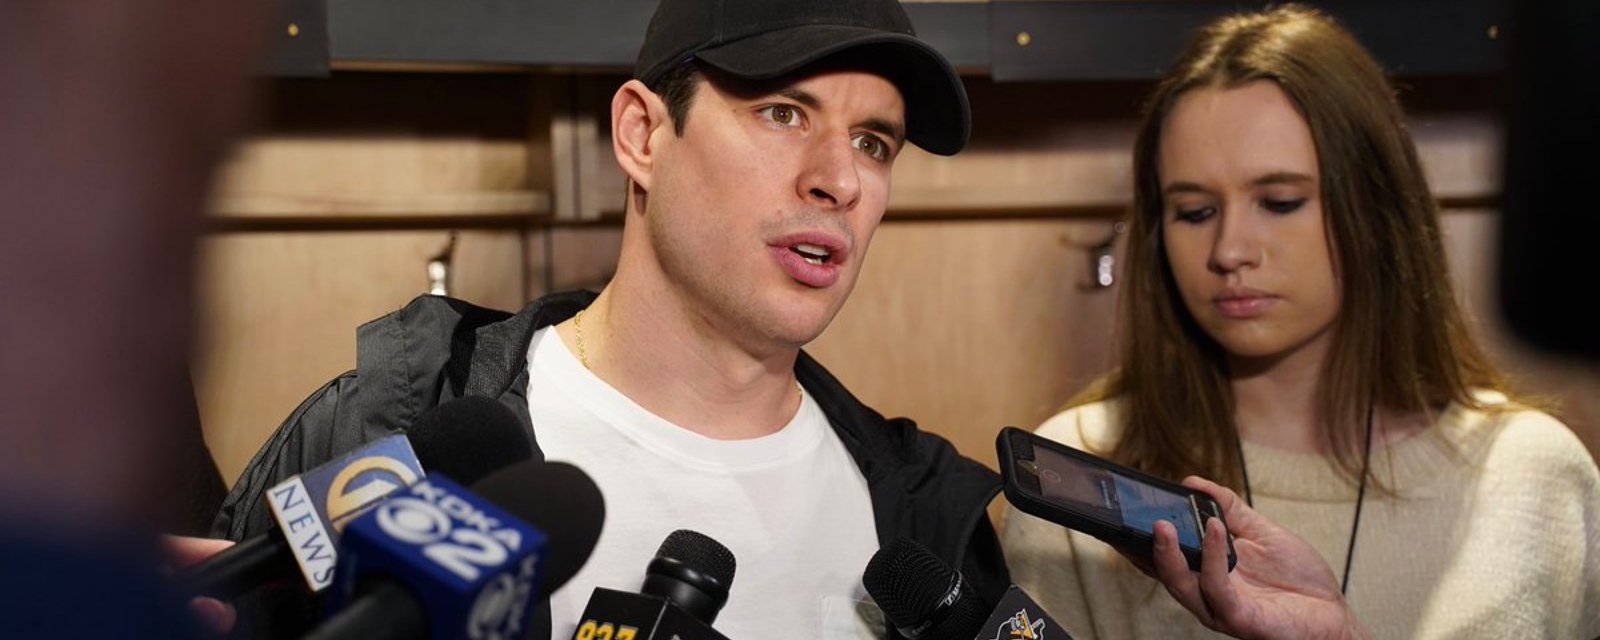 Crosby admits to injuries and feeling old as he declines World Championship invitation 